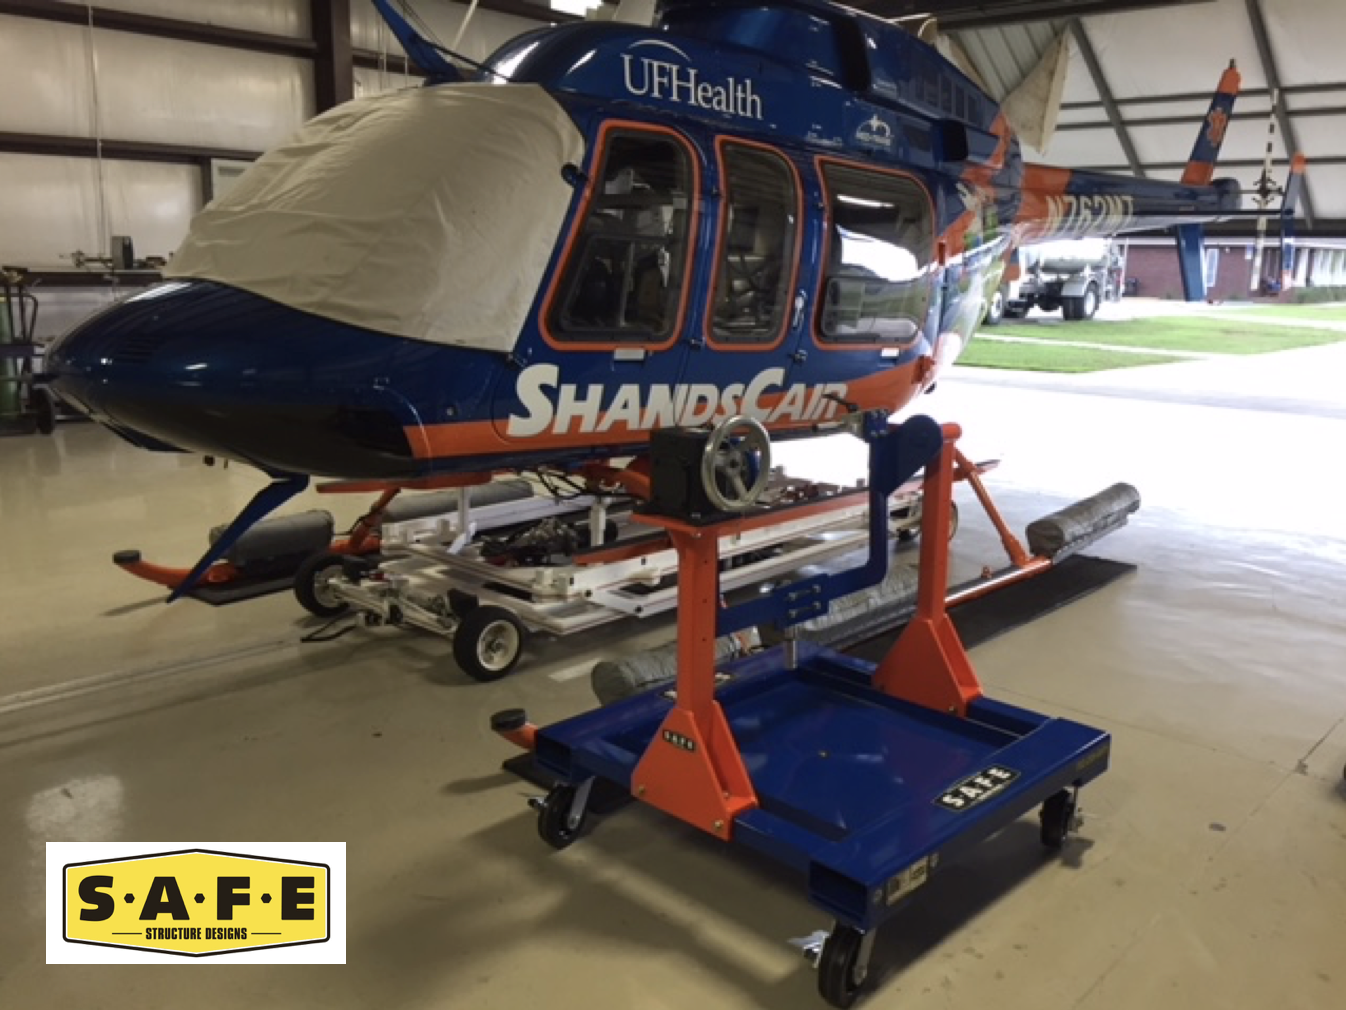 With S.A.F.E.’s engine stand, mechanics can effortlessly mount the engine into the stand and seamlessly rotate it 360 degrees with a hand crank. S.A.F.E. Photo